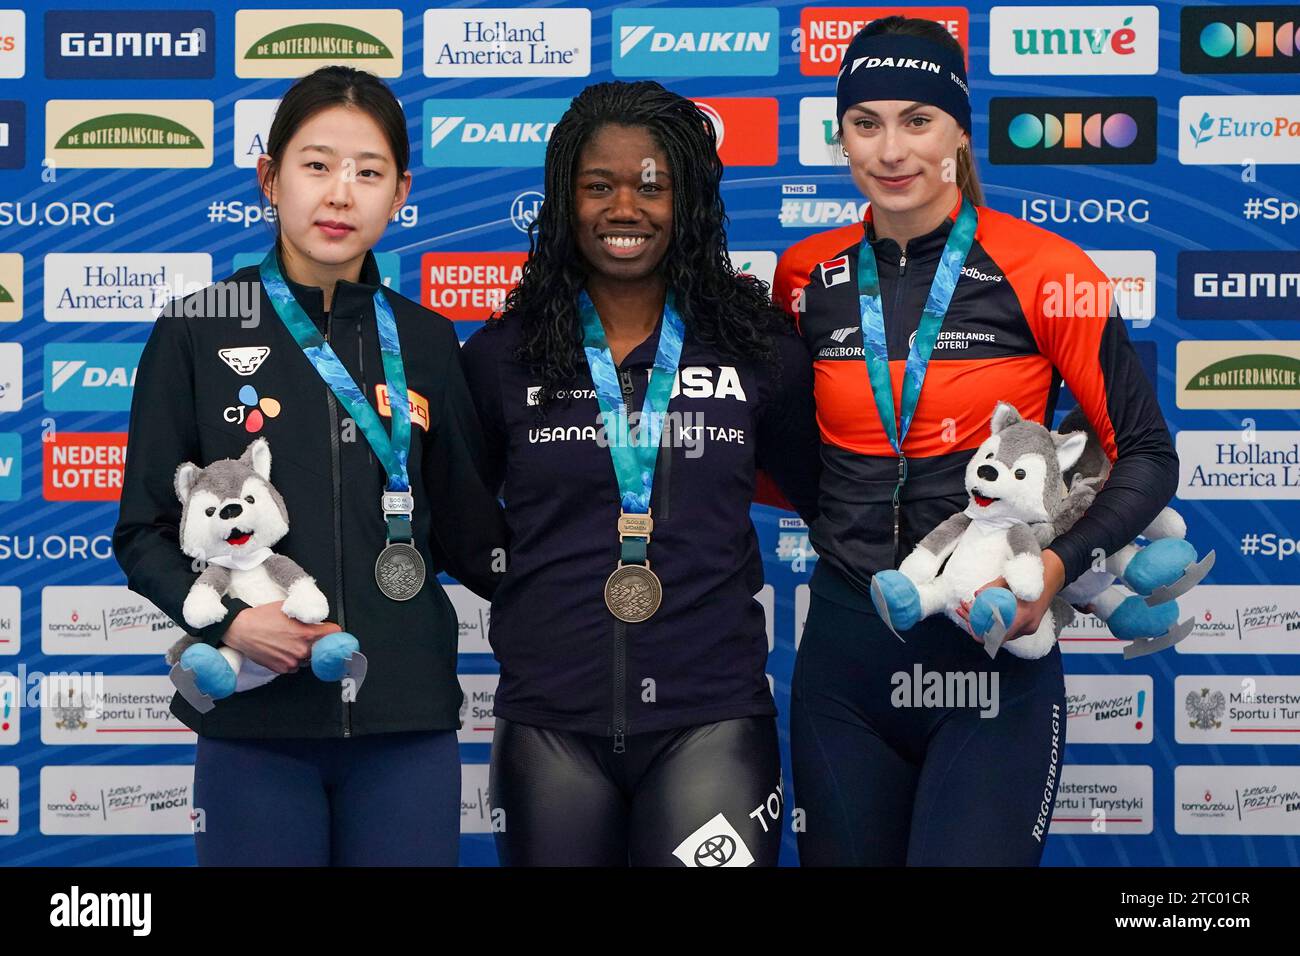 Tomaszow Mazowiecki, Poland. 9th Dec, 2023. TOMASZOW MAZOWIECKI, POLAND - DECEMBER 9: Min-Sun Kim of Korea, Erin Jackson of USA, Femke Kok of The Netherlands during the medal ceremony after competing on the Women's A Group 500m during the ISU Speed Skating World Cup at Arena Lodowa on December 9, 2023 in Tomaszow Mazowiecki, Poland. (Photo by Andre Weening/Orange Pictures) Credit: dpa/Alamy Live News Stock Photo